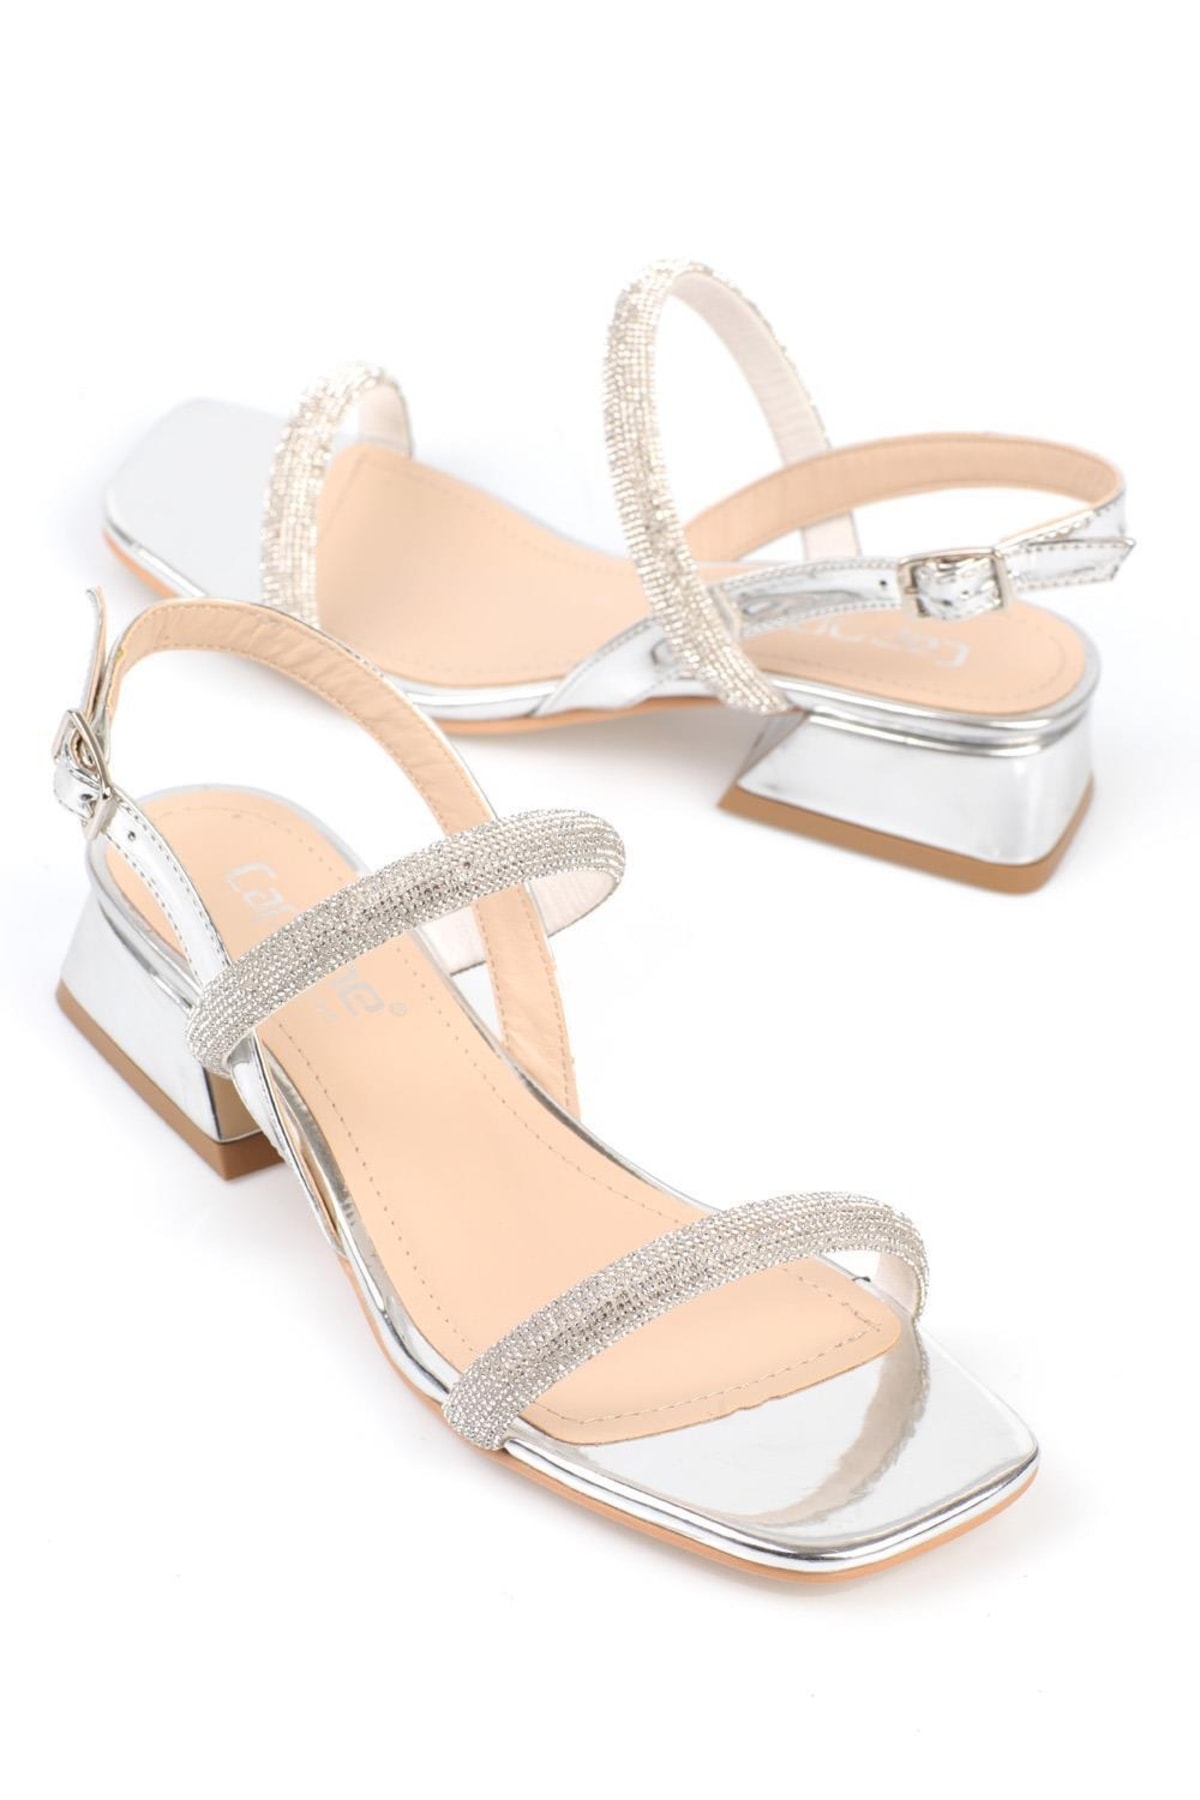 Capone Outfitters Capone Chunky Toe Women's Studded Double Thick Band Short Heels, Mirror Fabric Silver Women Sandals.